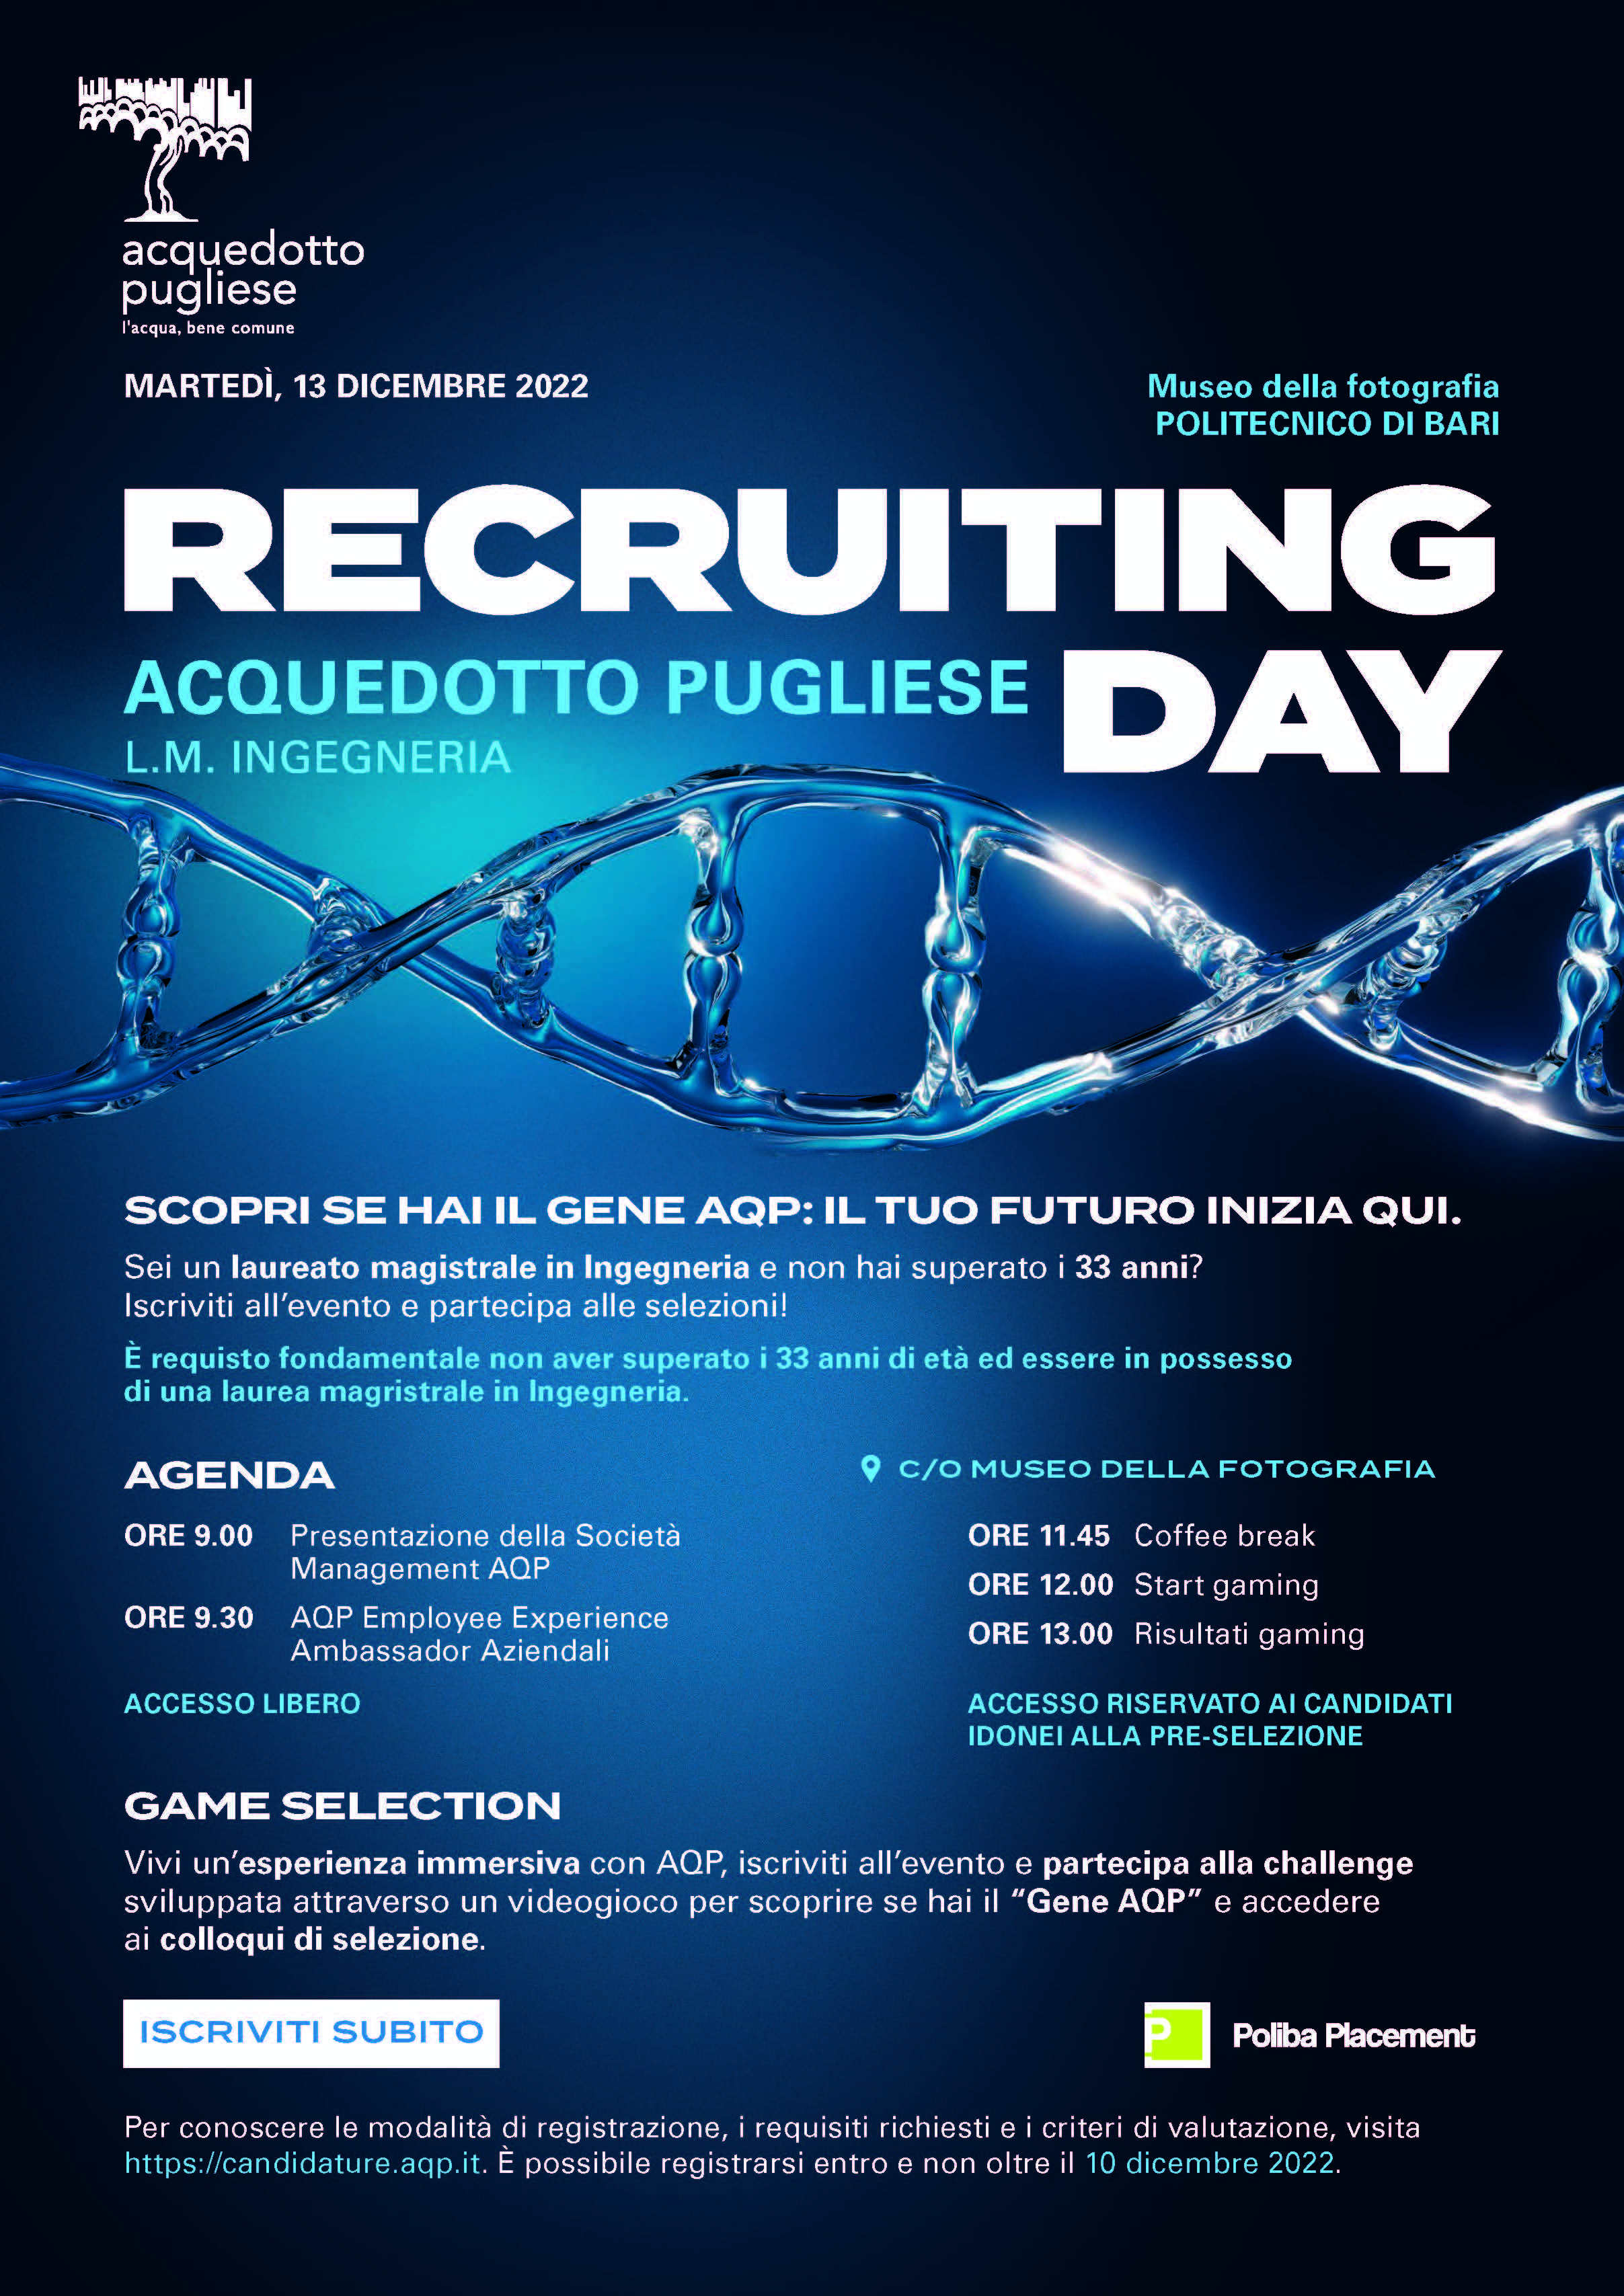 Recruiting day